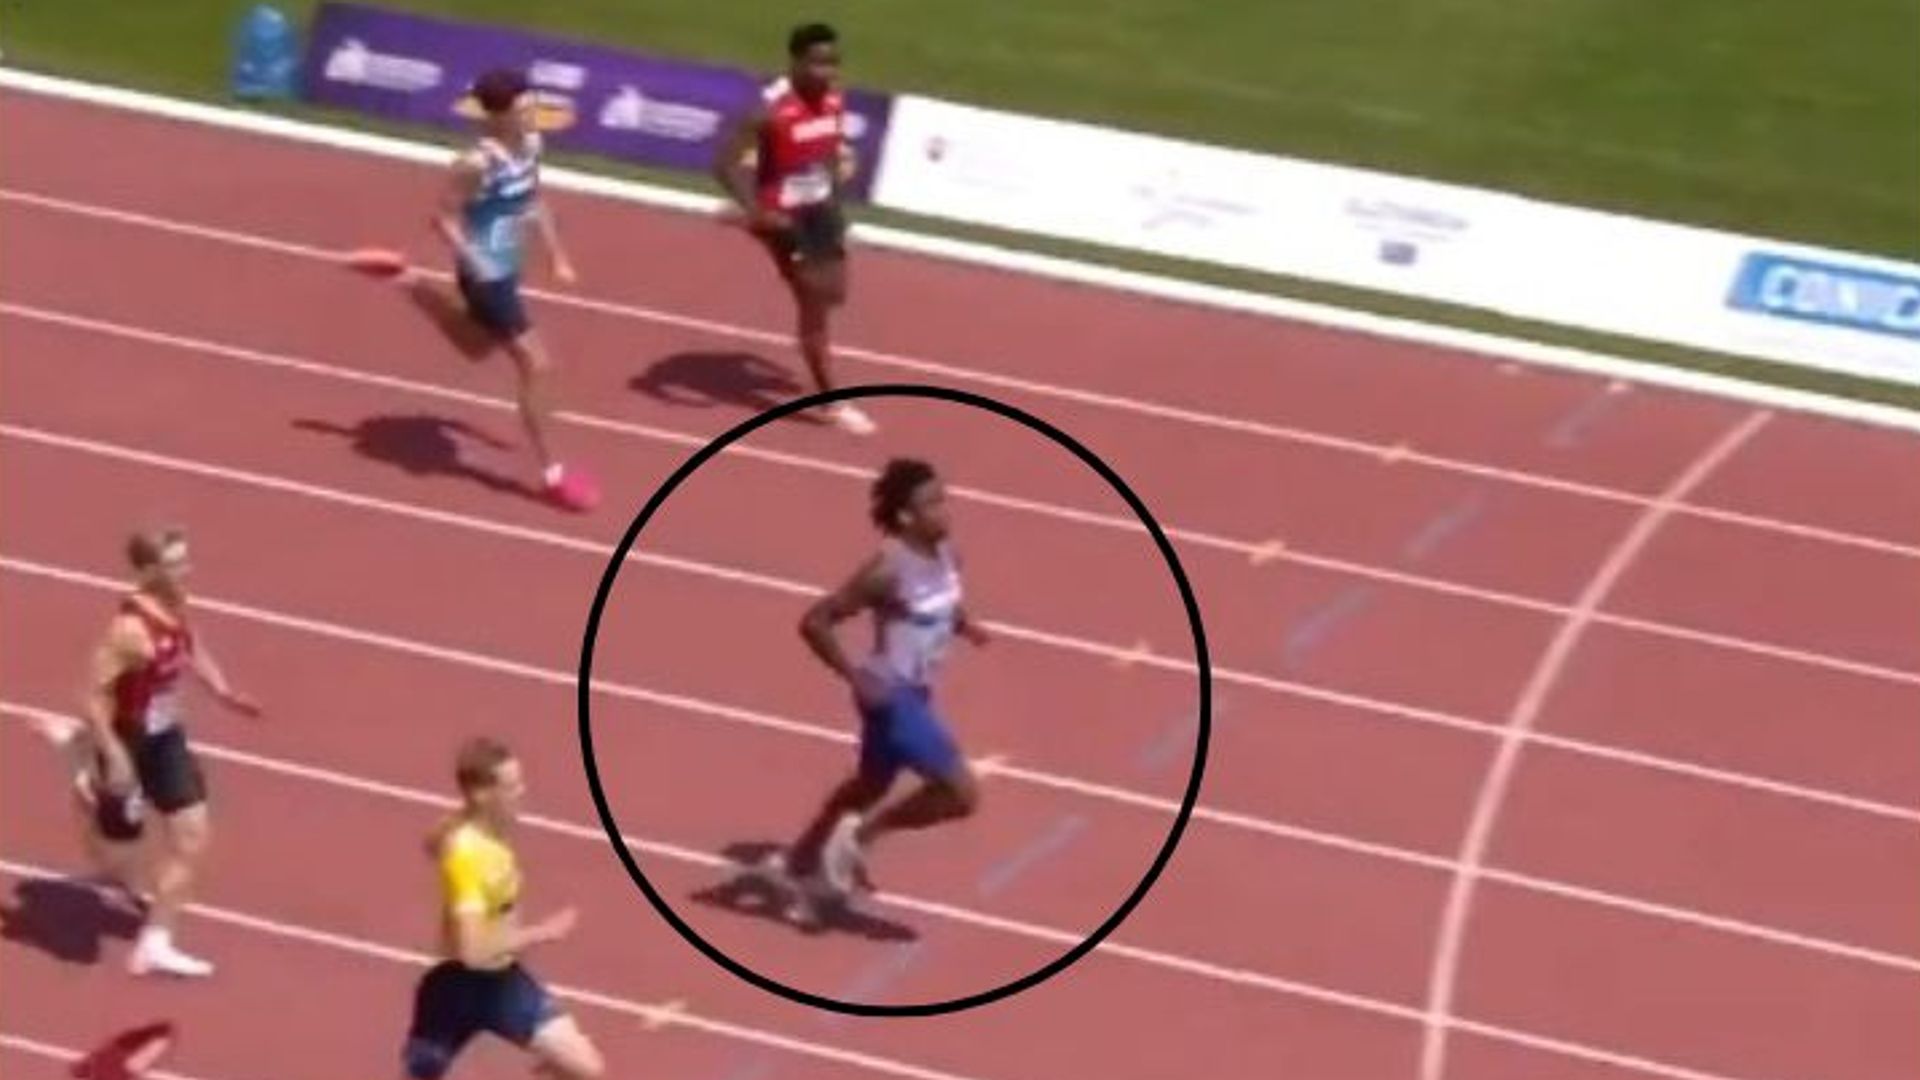 British sprinter suffers 'disaster' in race after he slows at finish line and gets overtaken